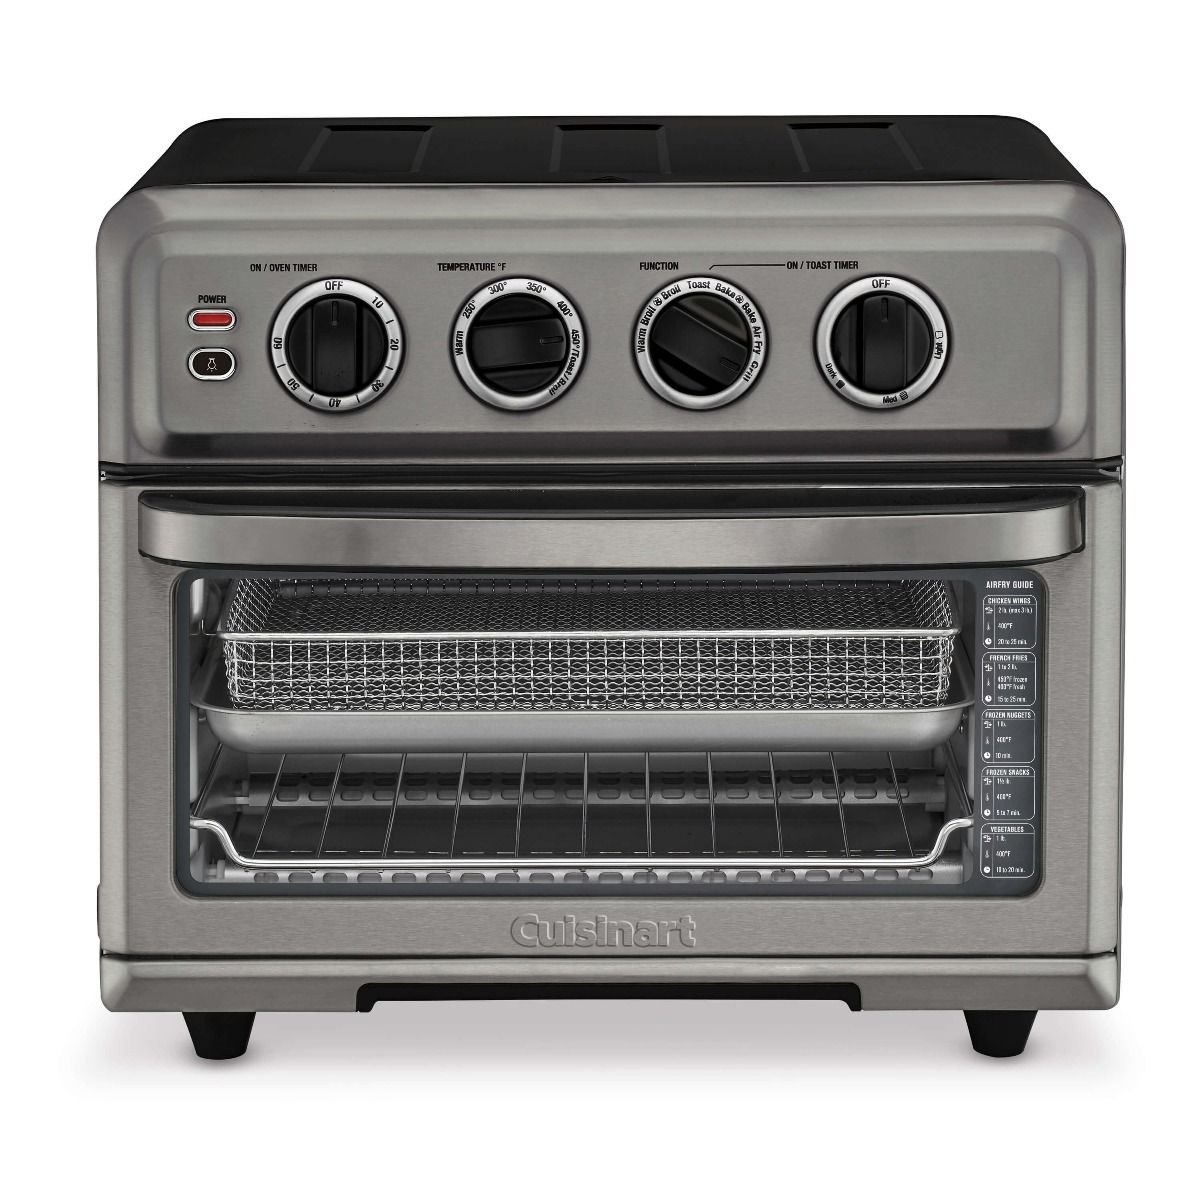 Cuisinart Airfryer Toaster Oven with Grill - Black Stainless